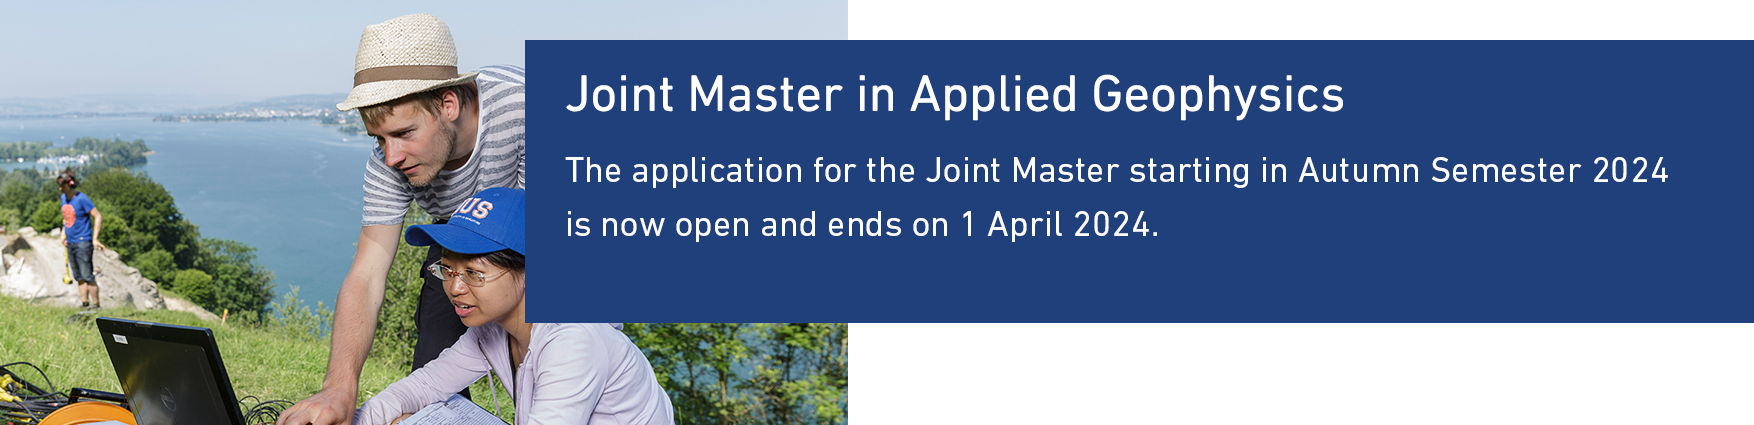 Joint Master in Applied Geophysics